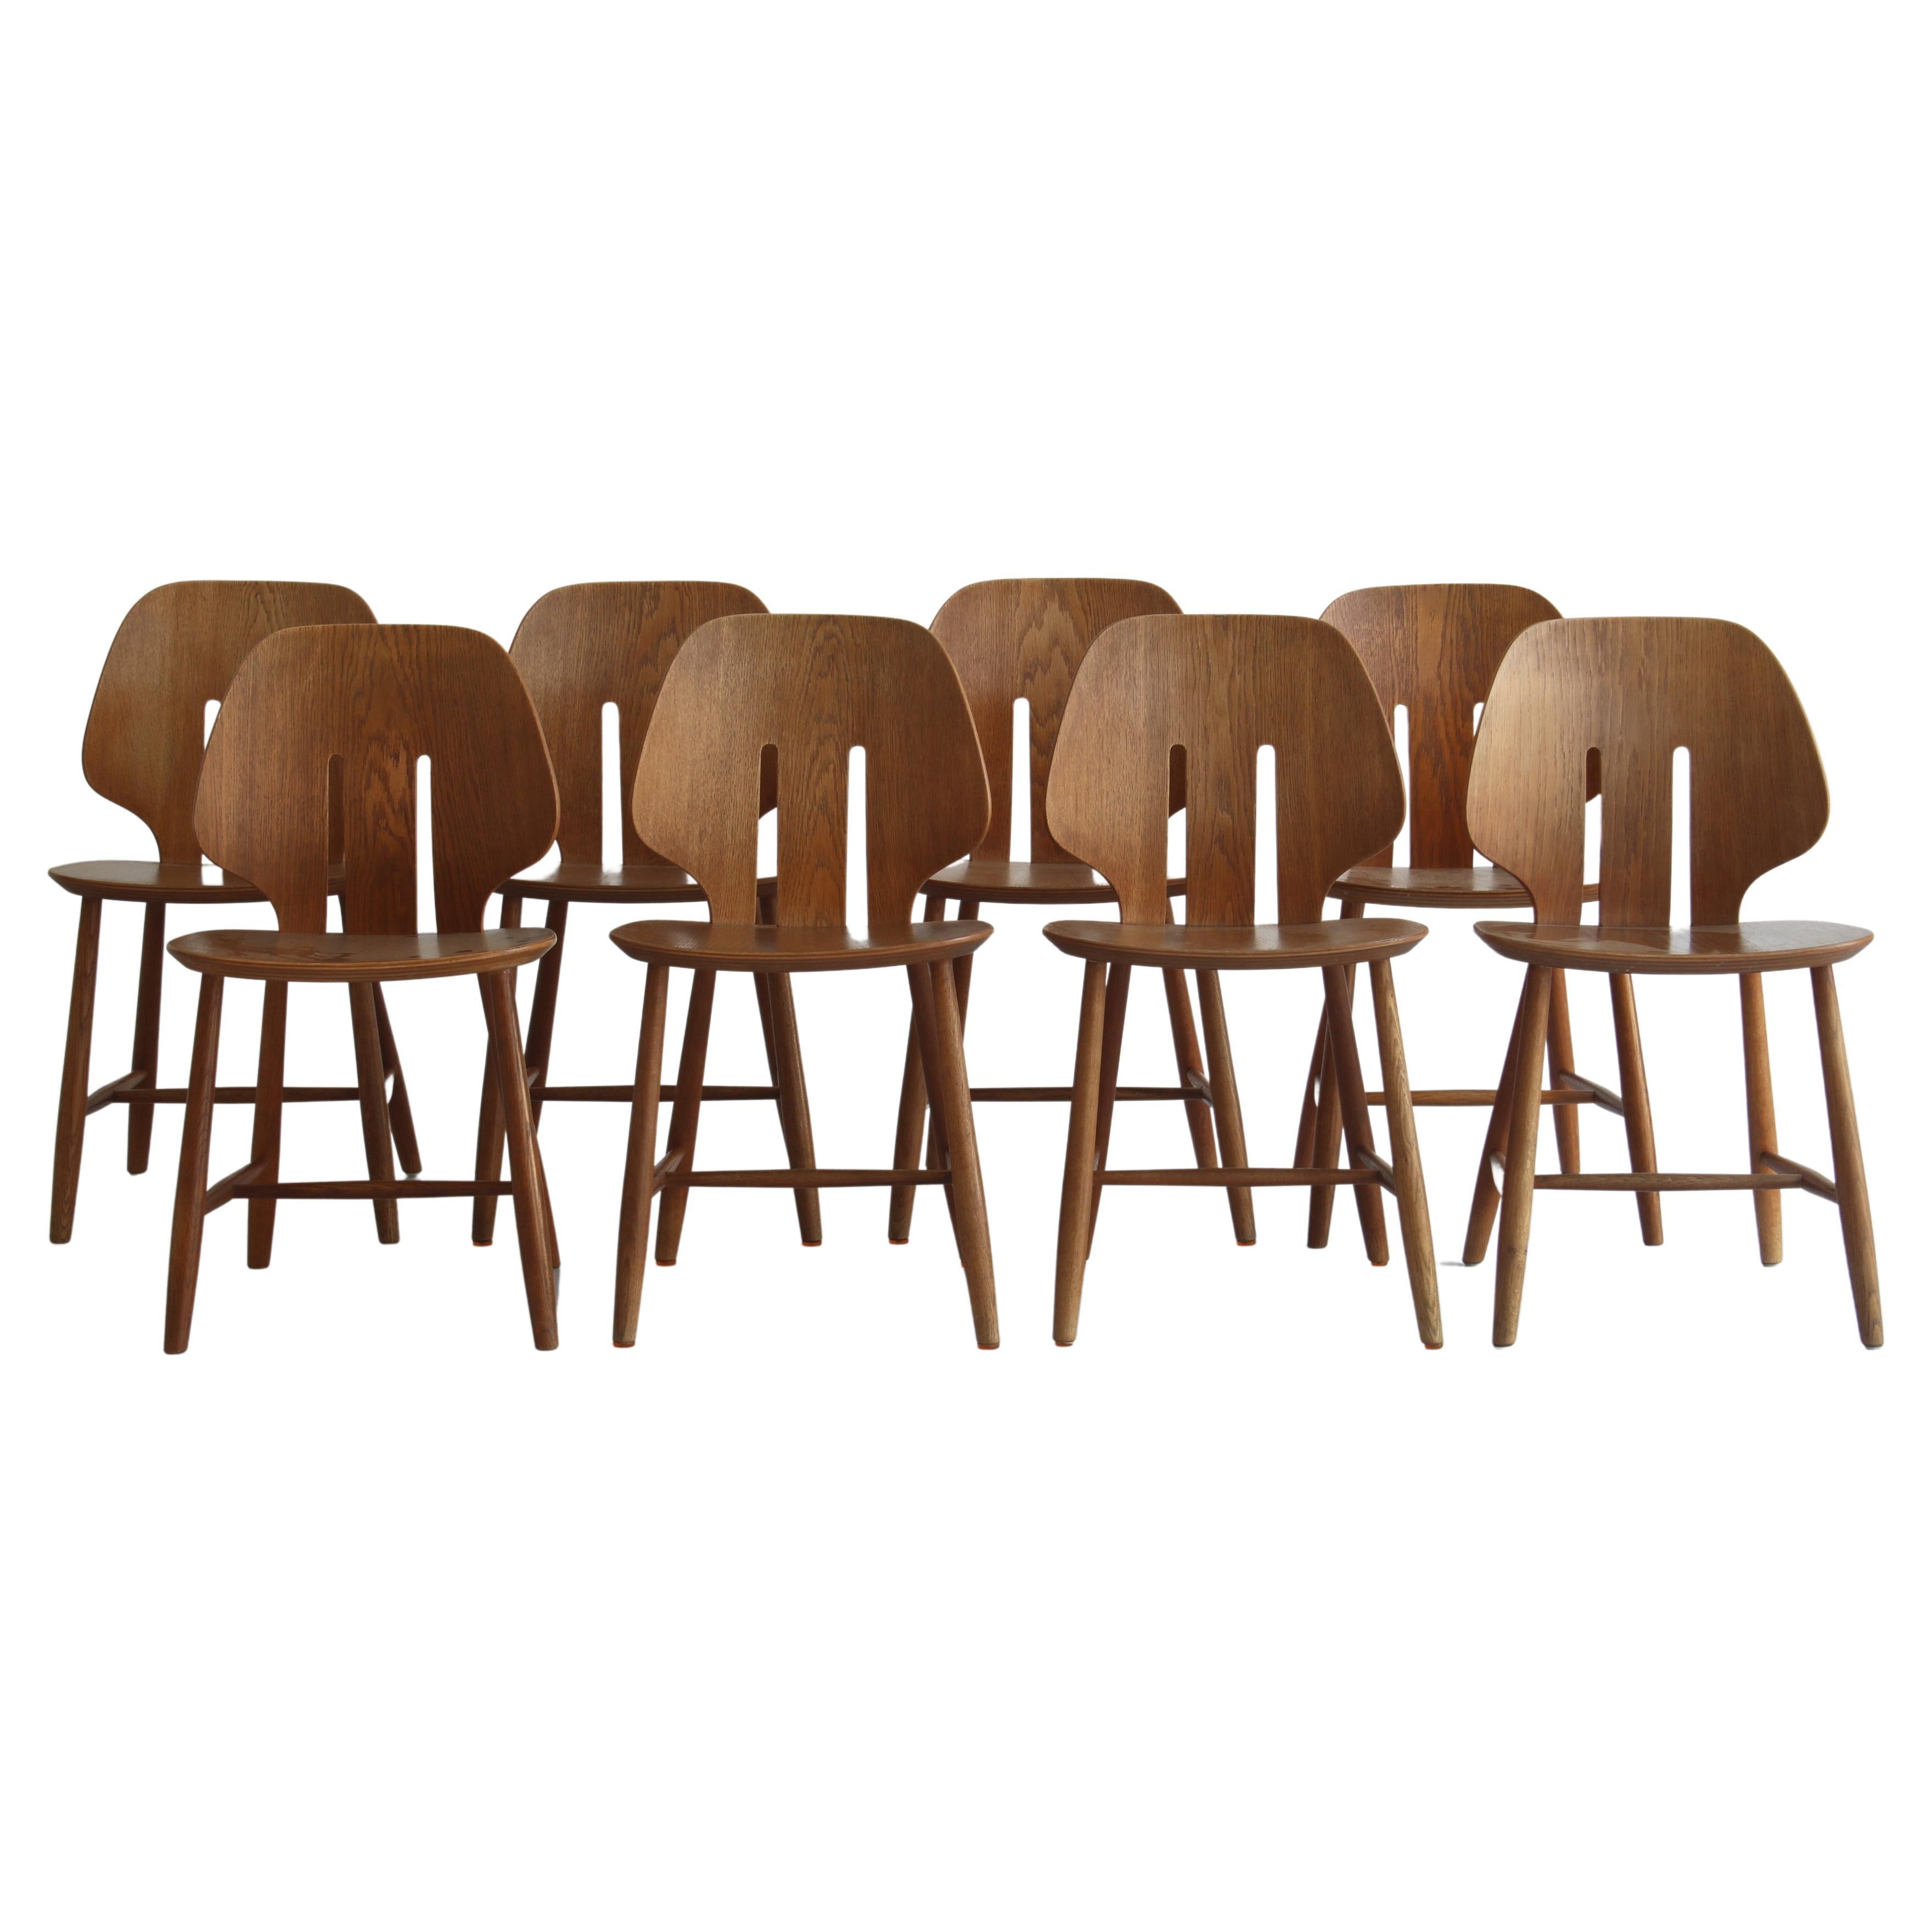 Set of 8 "J67" Dining Chairs by Ejvind A. Johansson for FDB, Denmark, 1963